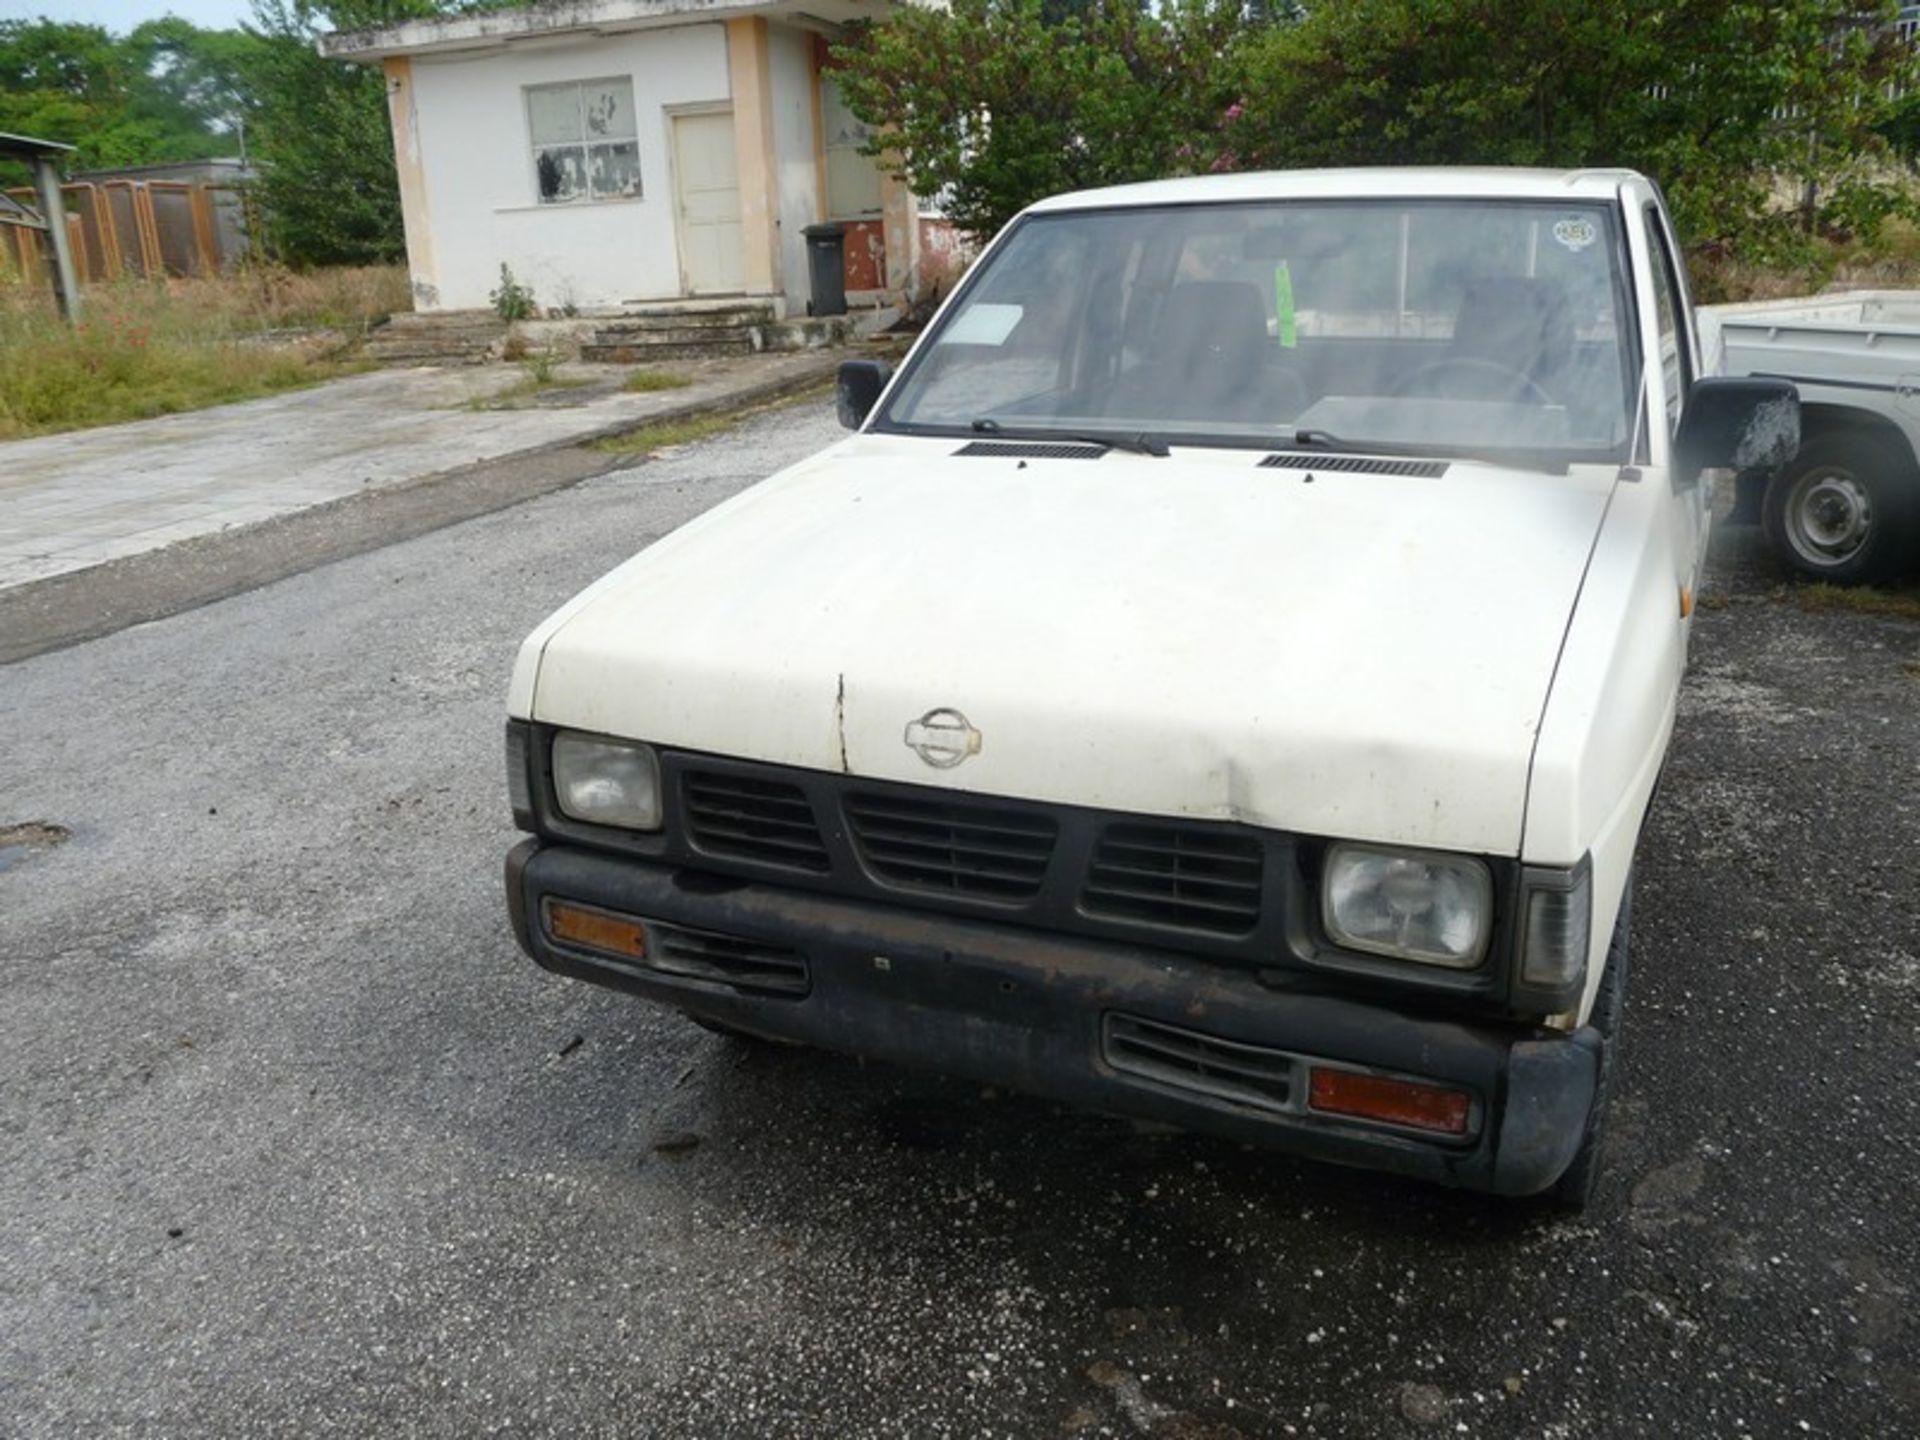 NISSAN KING CAB , REG: NBK 3437,PICK UP, PETROL ,KM 354381, WORKING CONDITION , MISSING BATTERY ( - Image 2 of 11